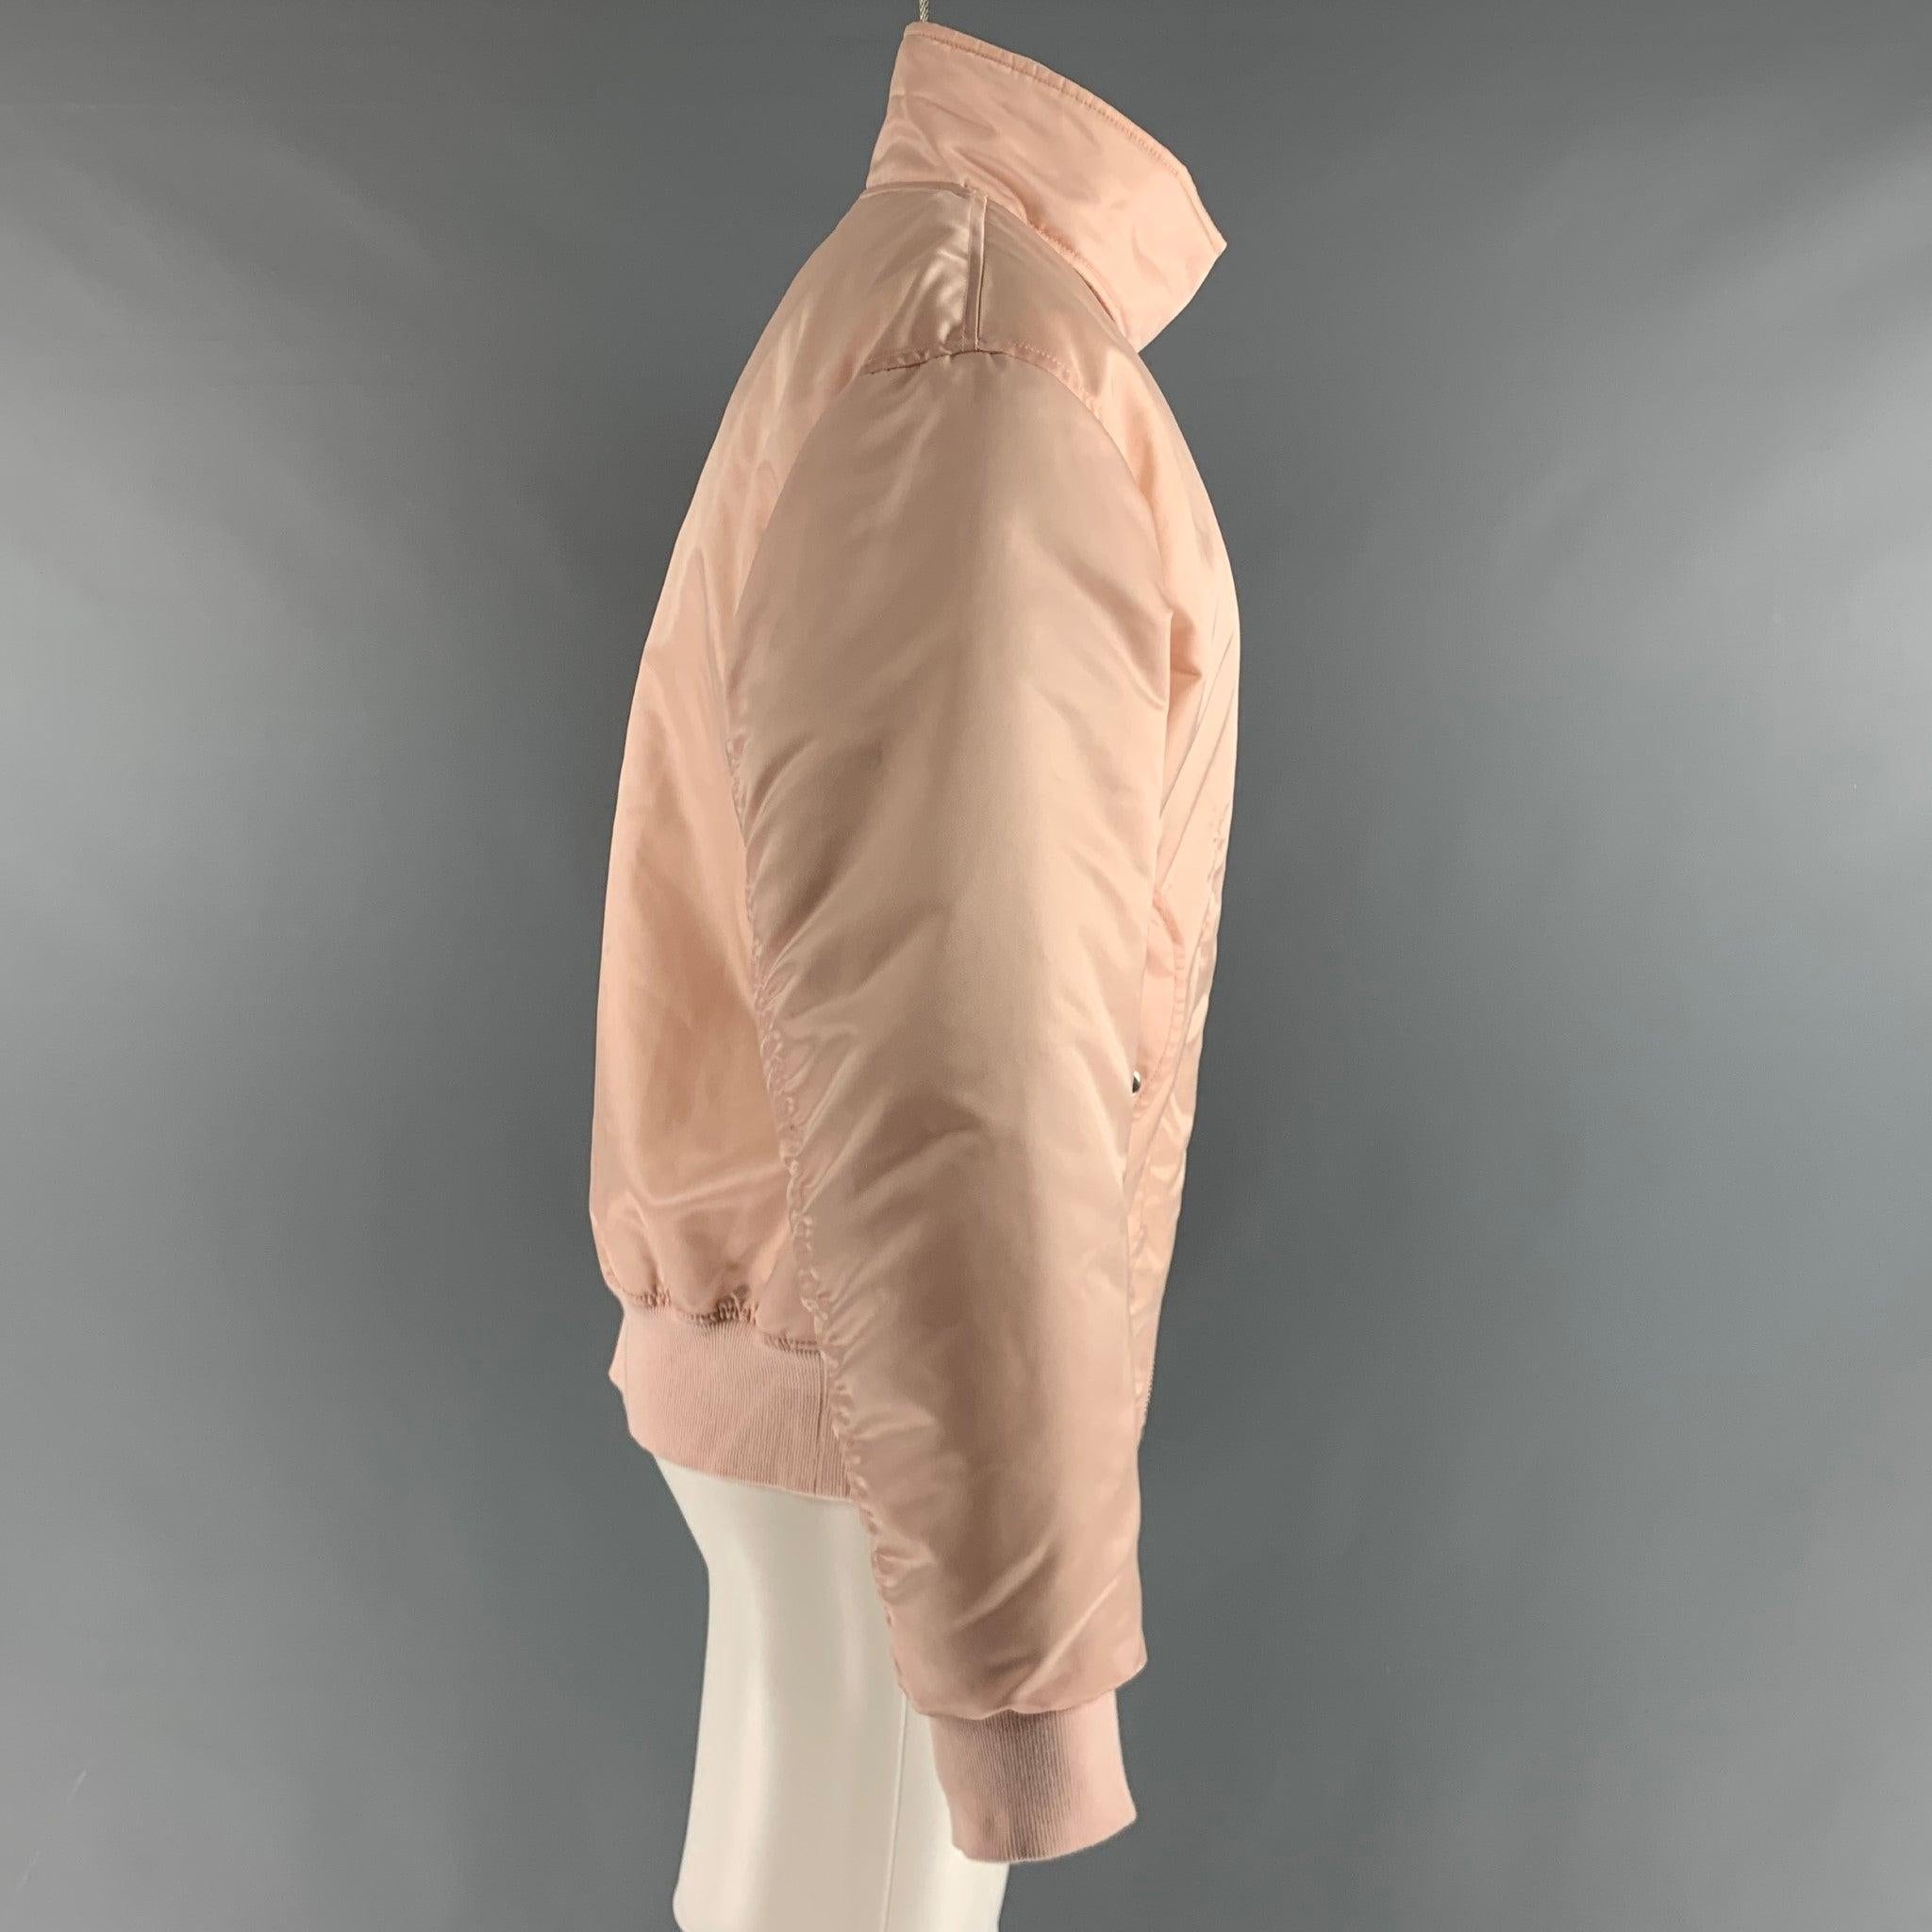 HELMUT LANG jacket comes in a pink nylon woven material featuring a bomber style, ribbed hem, flap pockets, buttoned collar, and a full zip up closure. Very Good Pre-Owned Condition. Minor marks. 

Marked:   M 

Measurements: 
 
Shoulder: 21.5